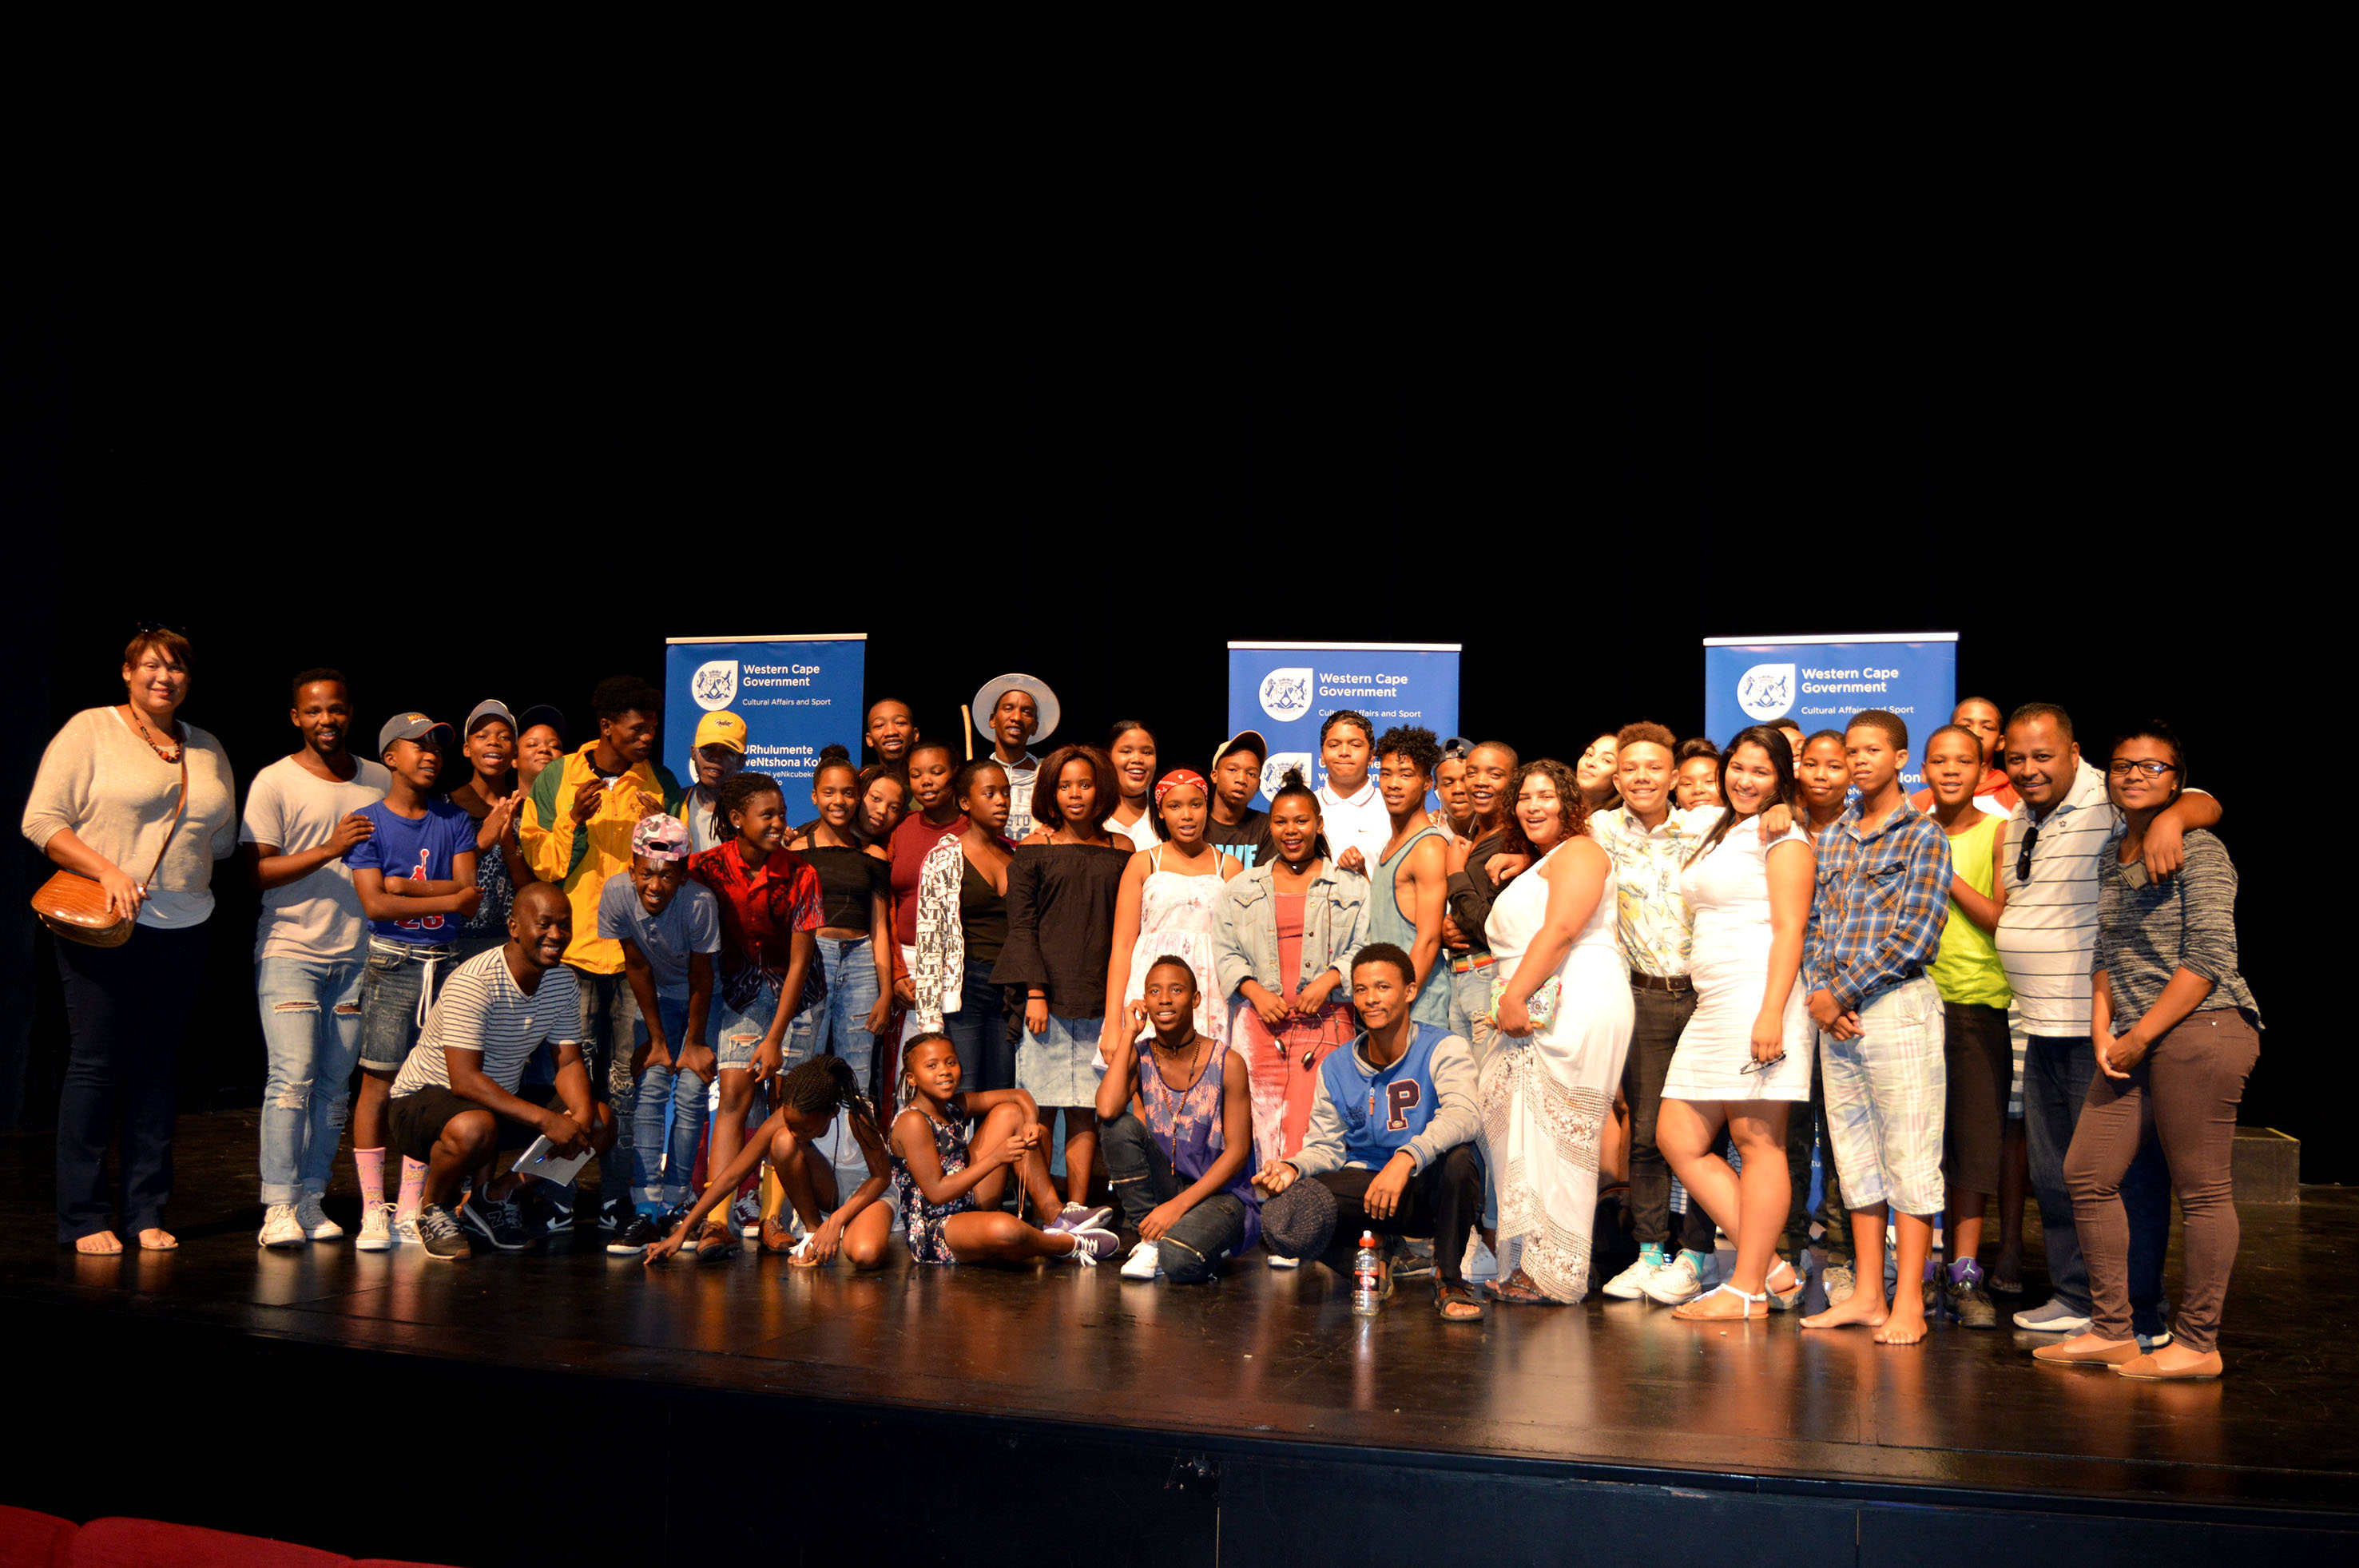 The Cast of the Best of DCAS showcase with Liezl Jansen and Moeniel Jacobs from DCAS